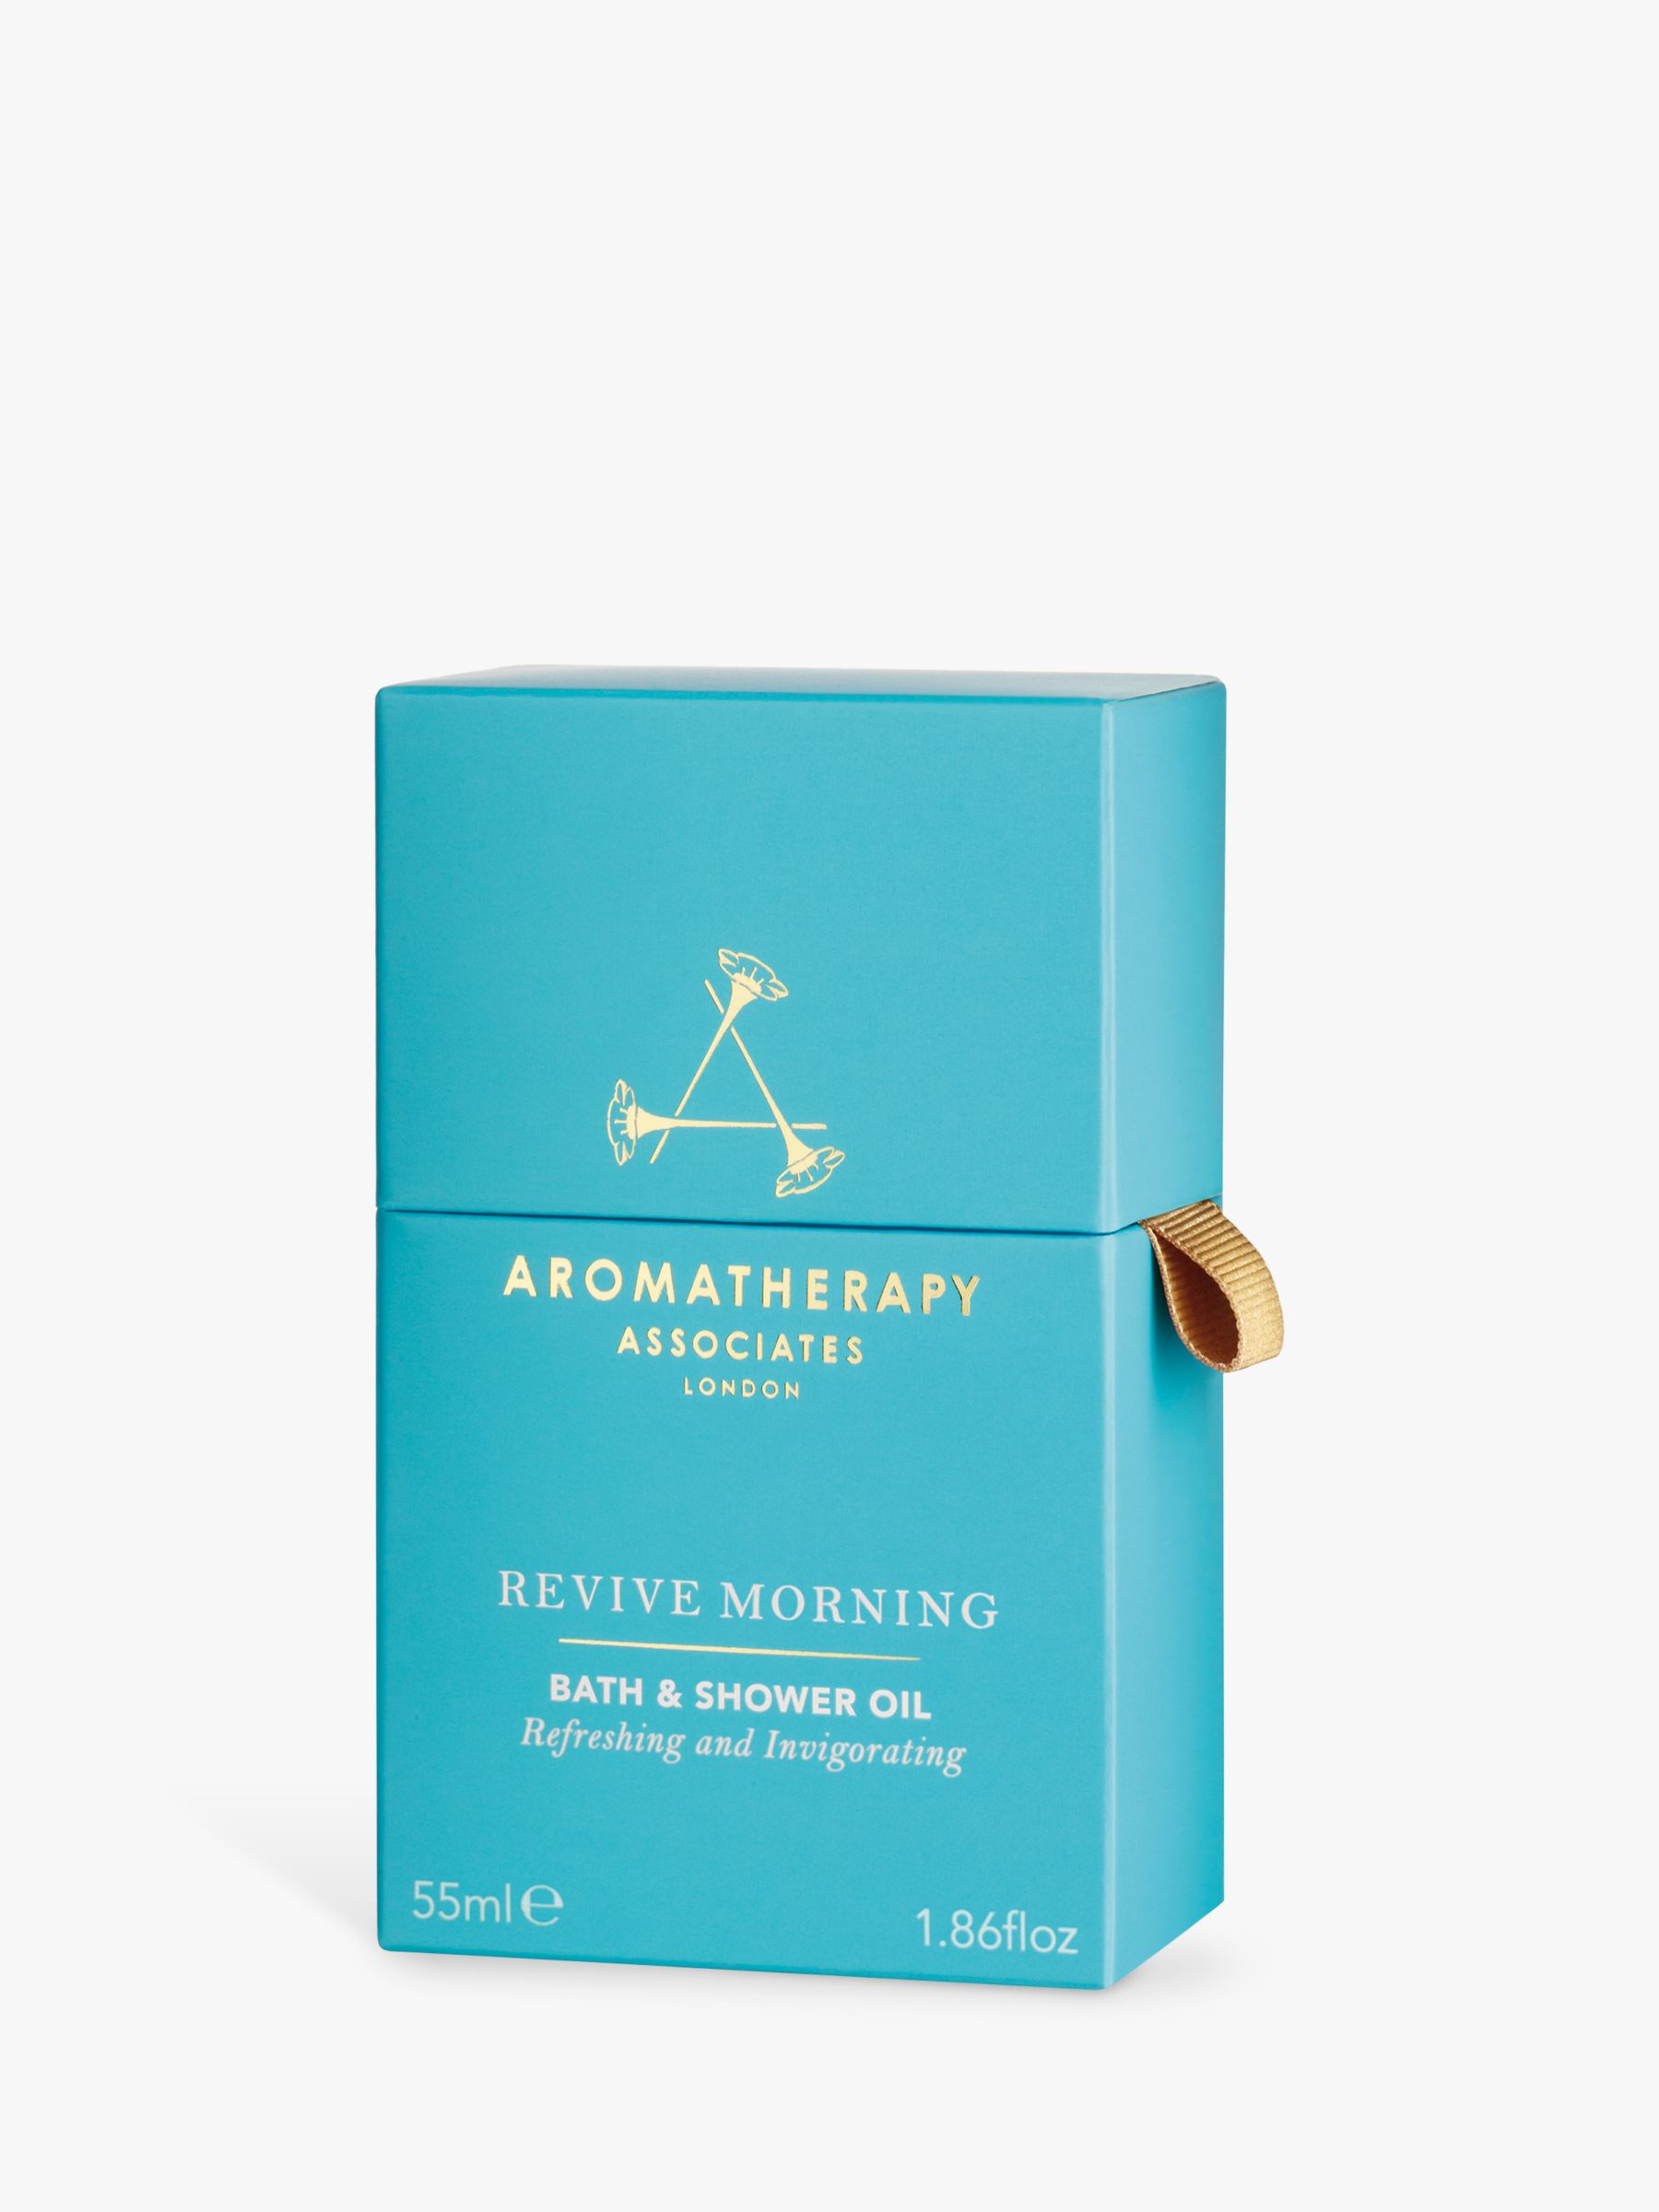 Aromatherapy Associates Revive Morning Bath and Shower Oil, 55ml